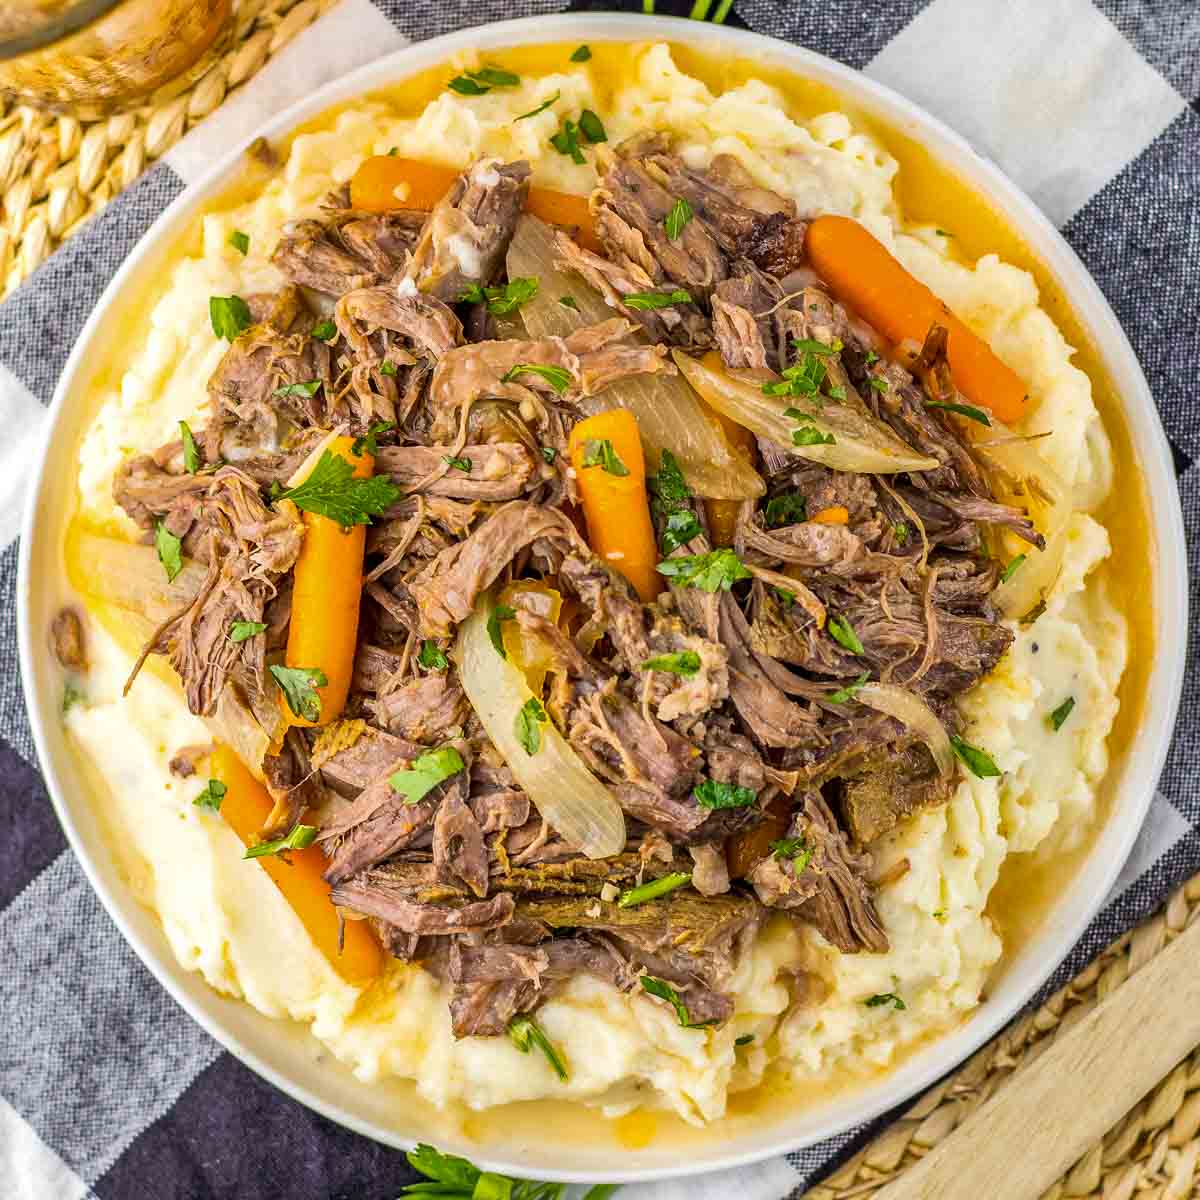 A plate of pot roast with carrots and mashed potatoes.